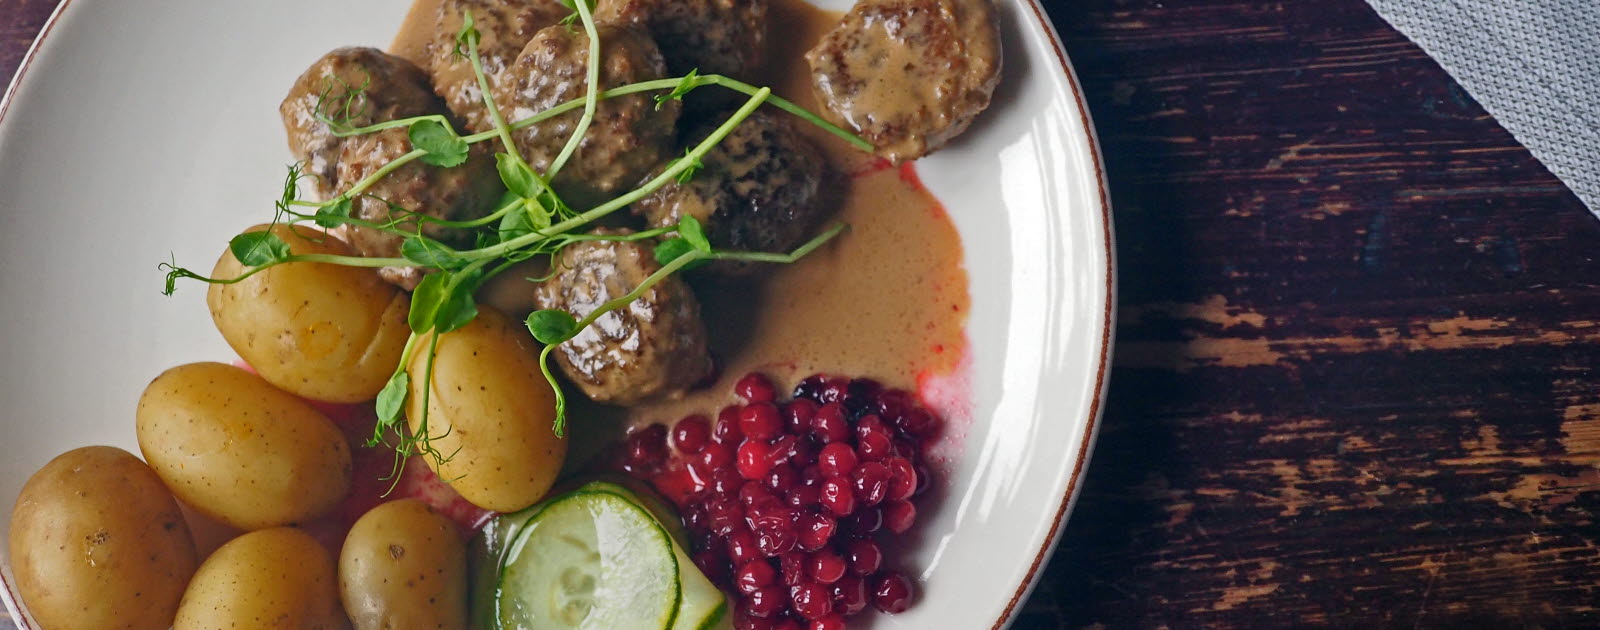 Meat balls on a plate